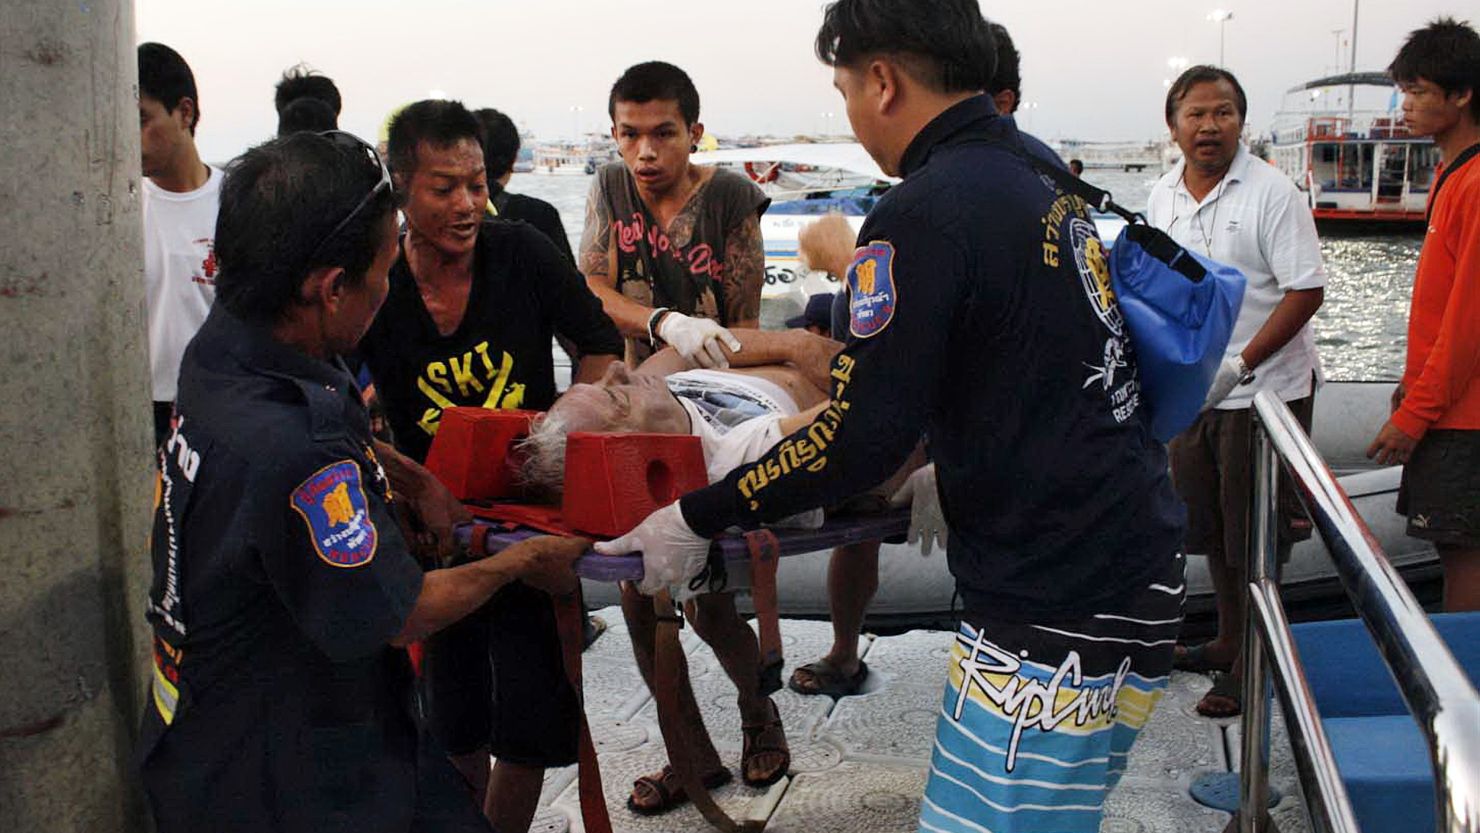 Thai rescue personnel evacuate an injured foreign tourist after a ferry sank off the coast in Pattaya on November 3, 2013.